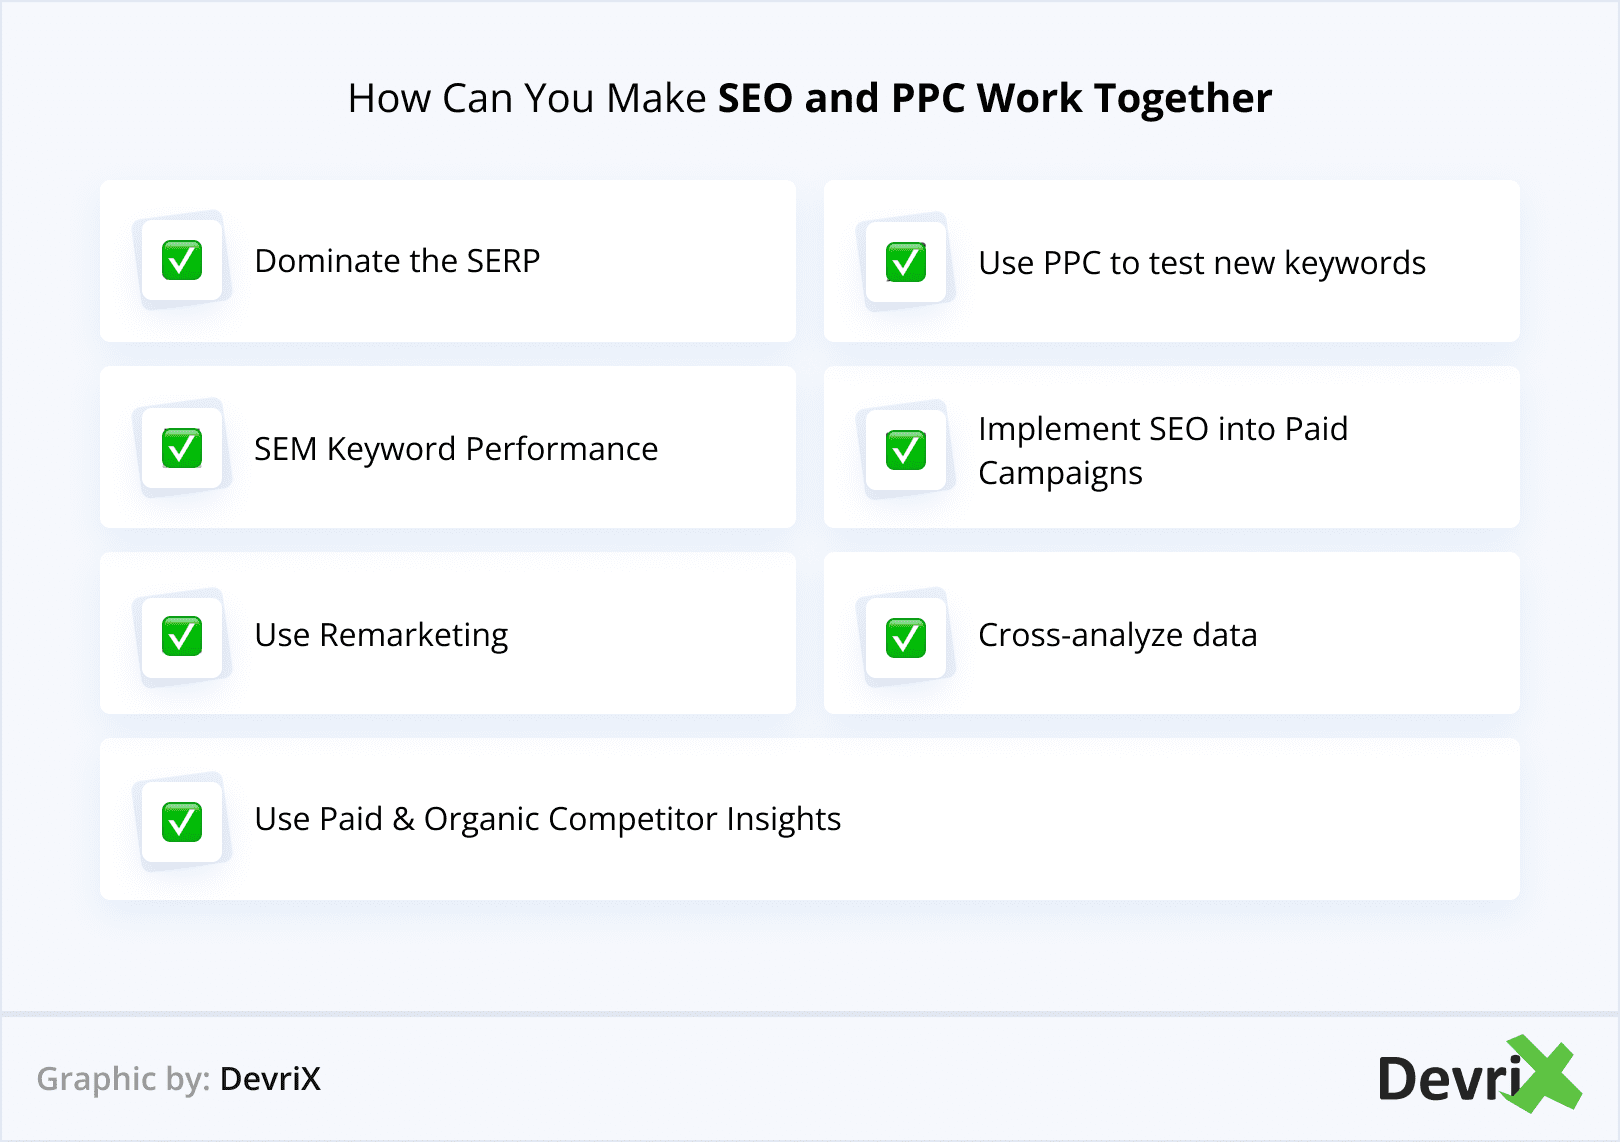 How Can You Make SEO and PPC Work Together